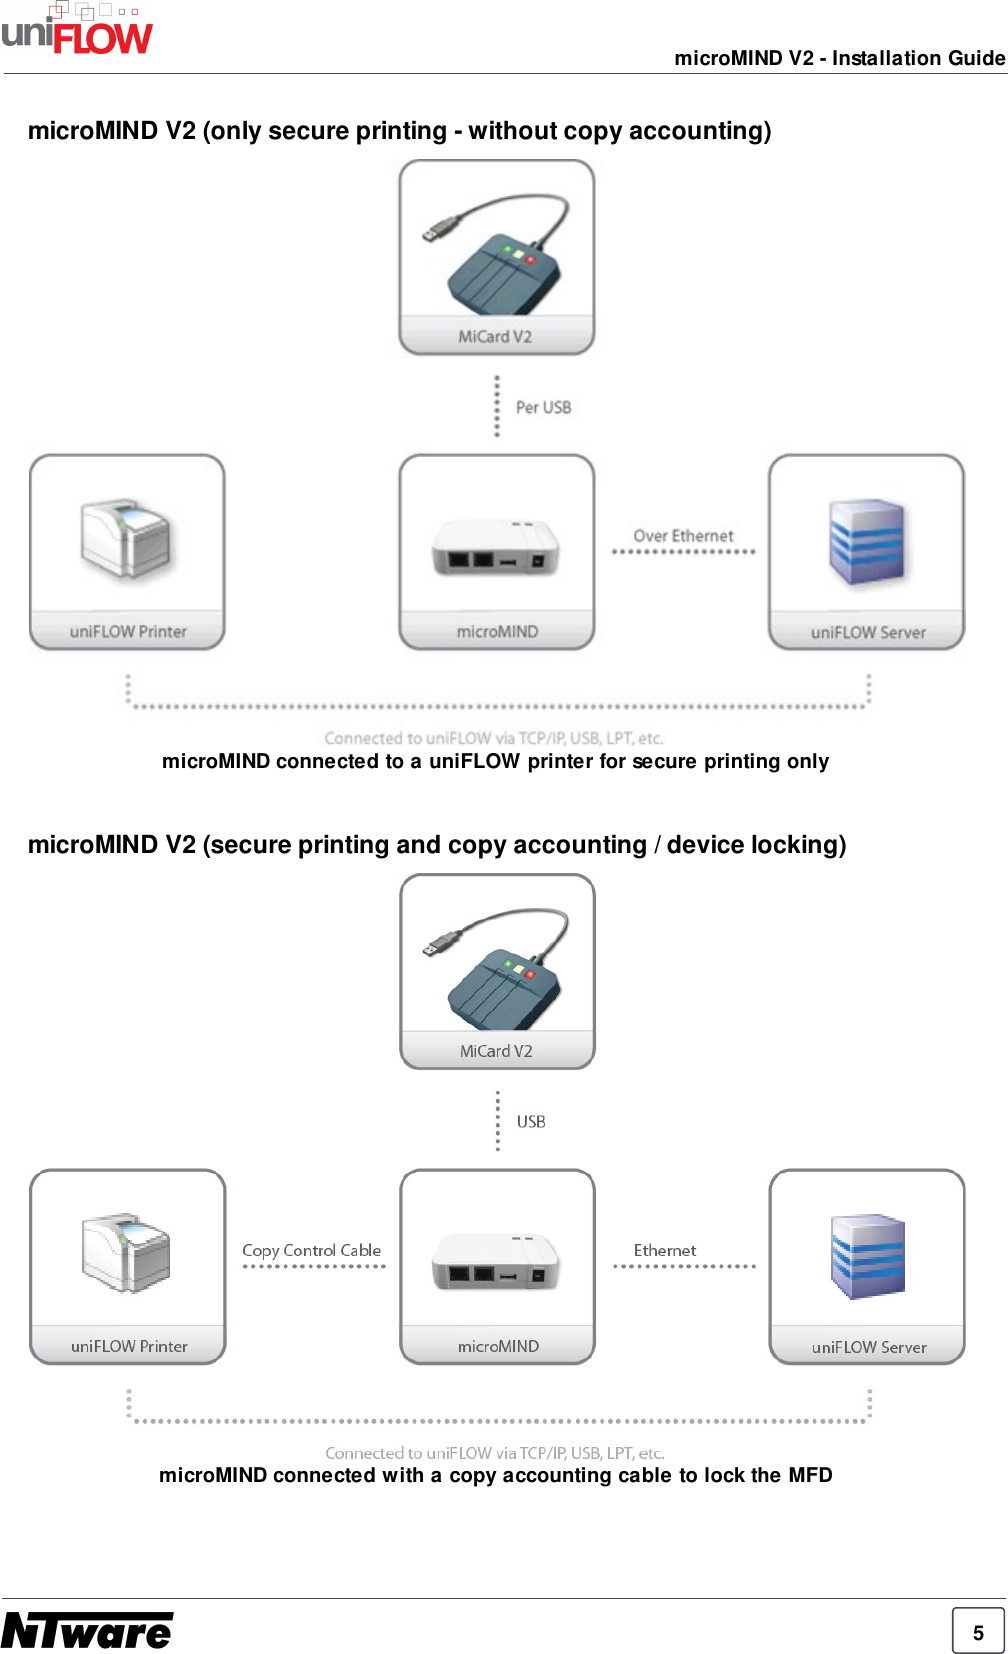 5microMIND V2 - Installation GuidemicroMIND V2 (only secure printing - without copy accounting)microMIND connected to a uniFLOW printer for secure printing onlymicroMIND V2 (secure printing and copy accounting / device locking)microMIND connected with a copy accounting cable to lock the MFD